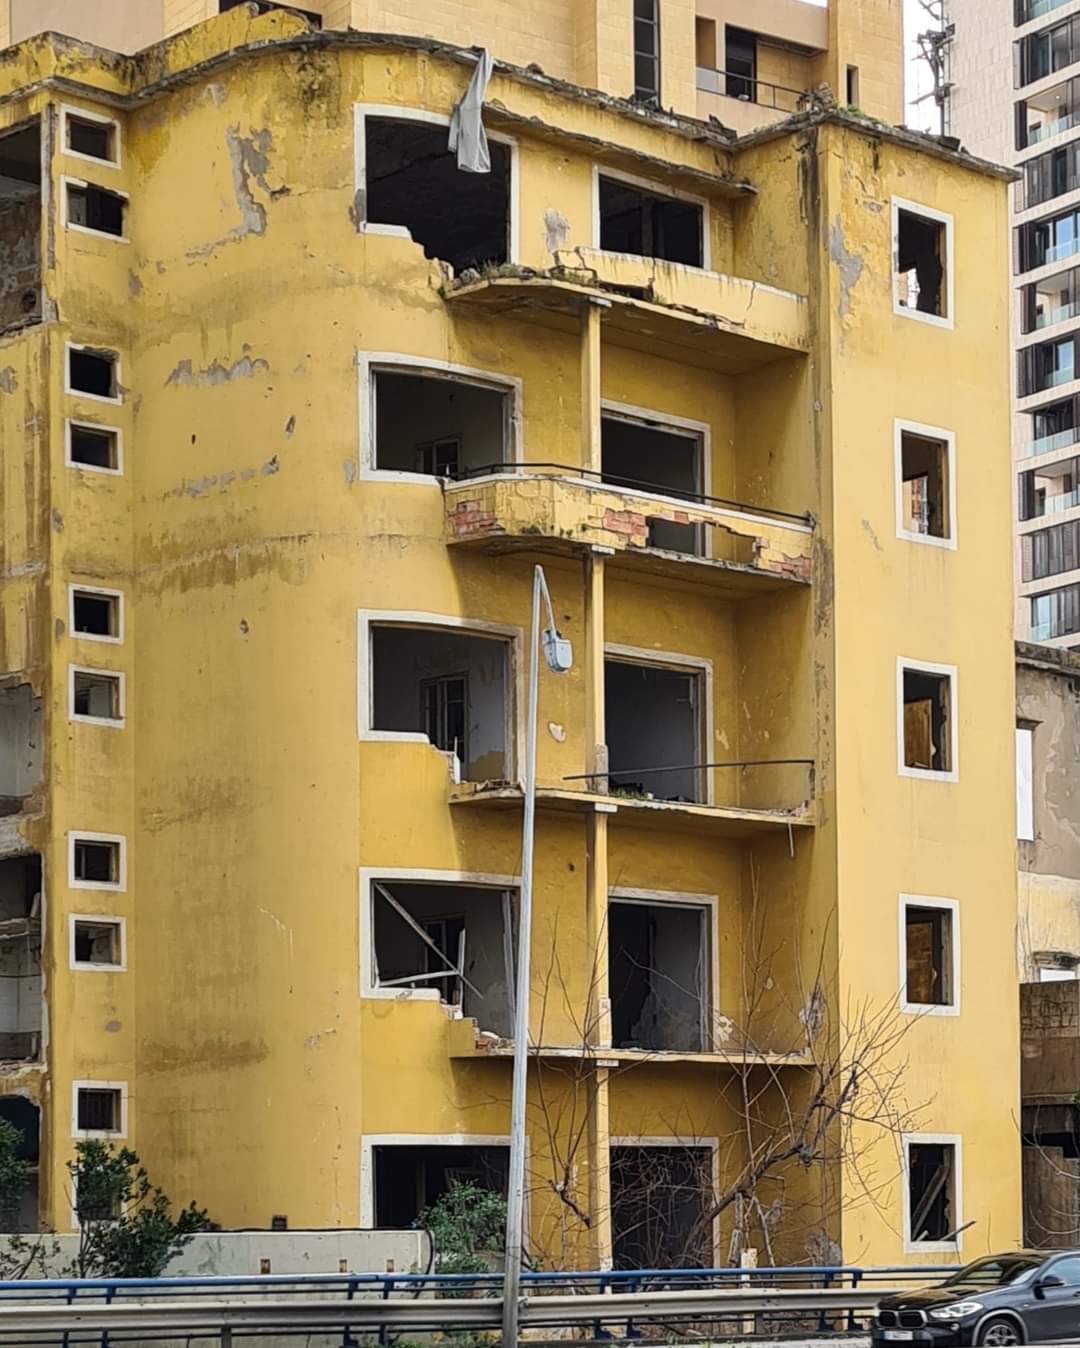 A building damaged by the explosion at Beirut port, Lebanon